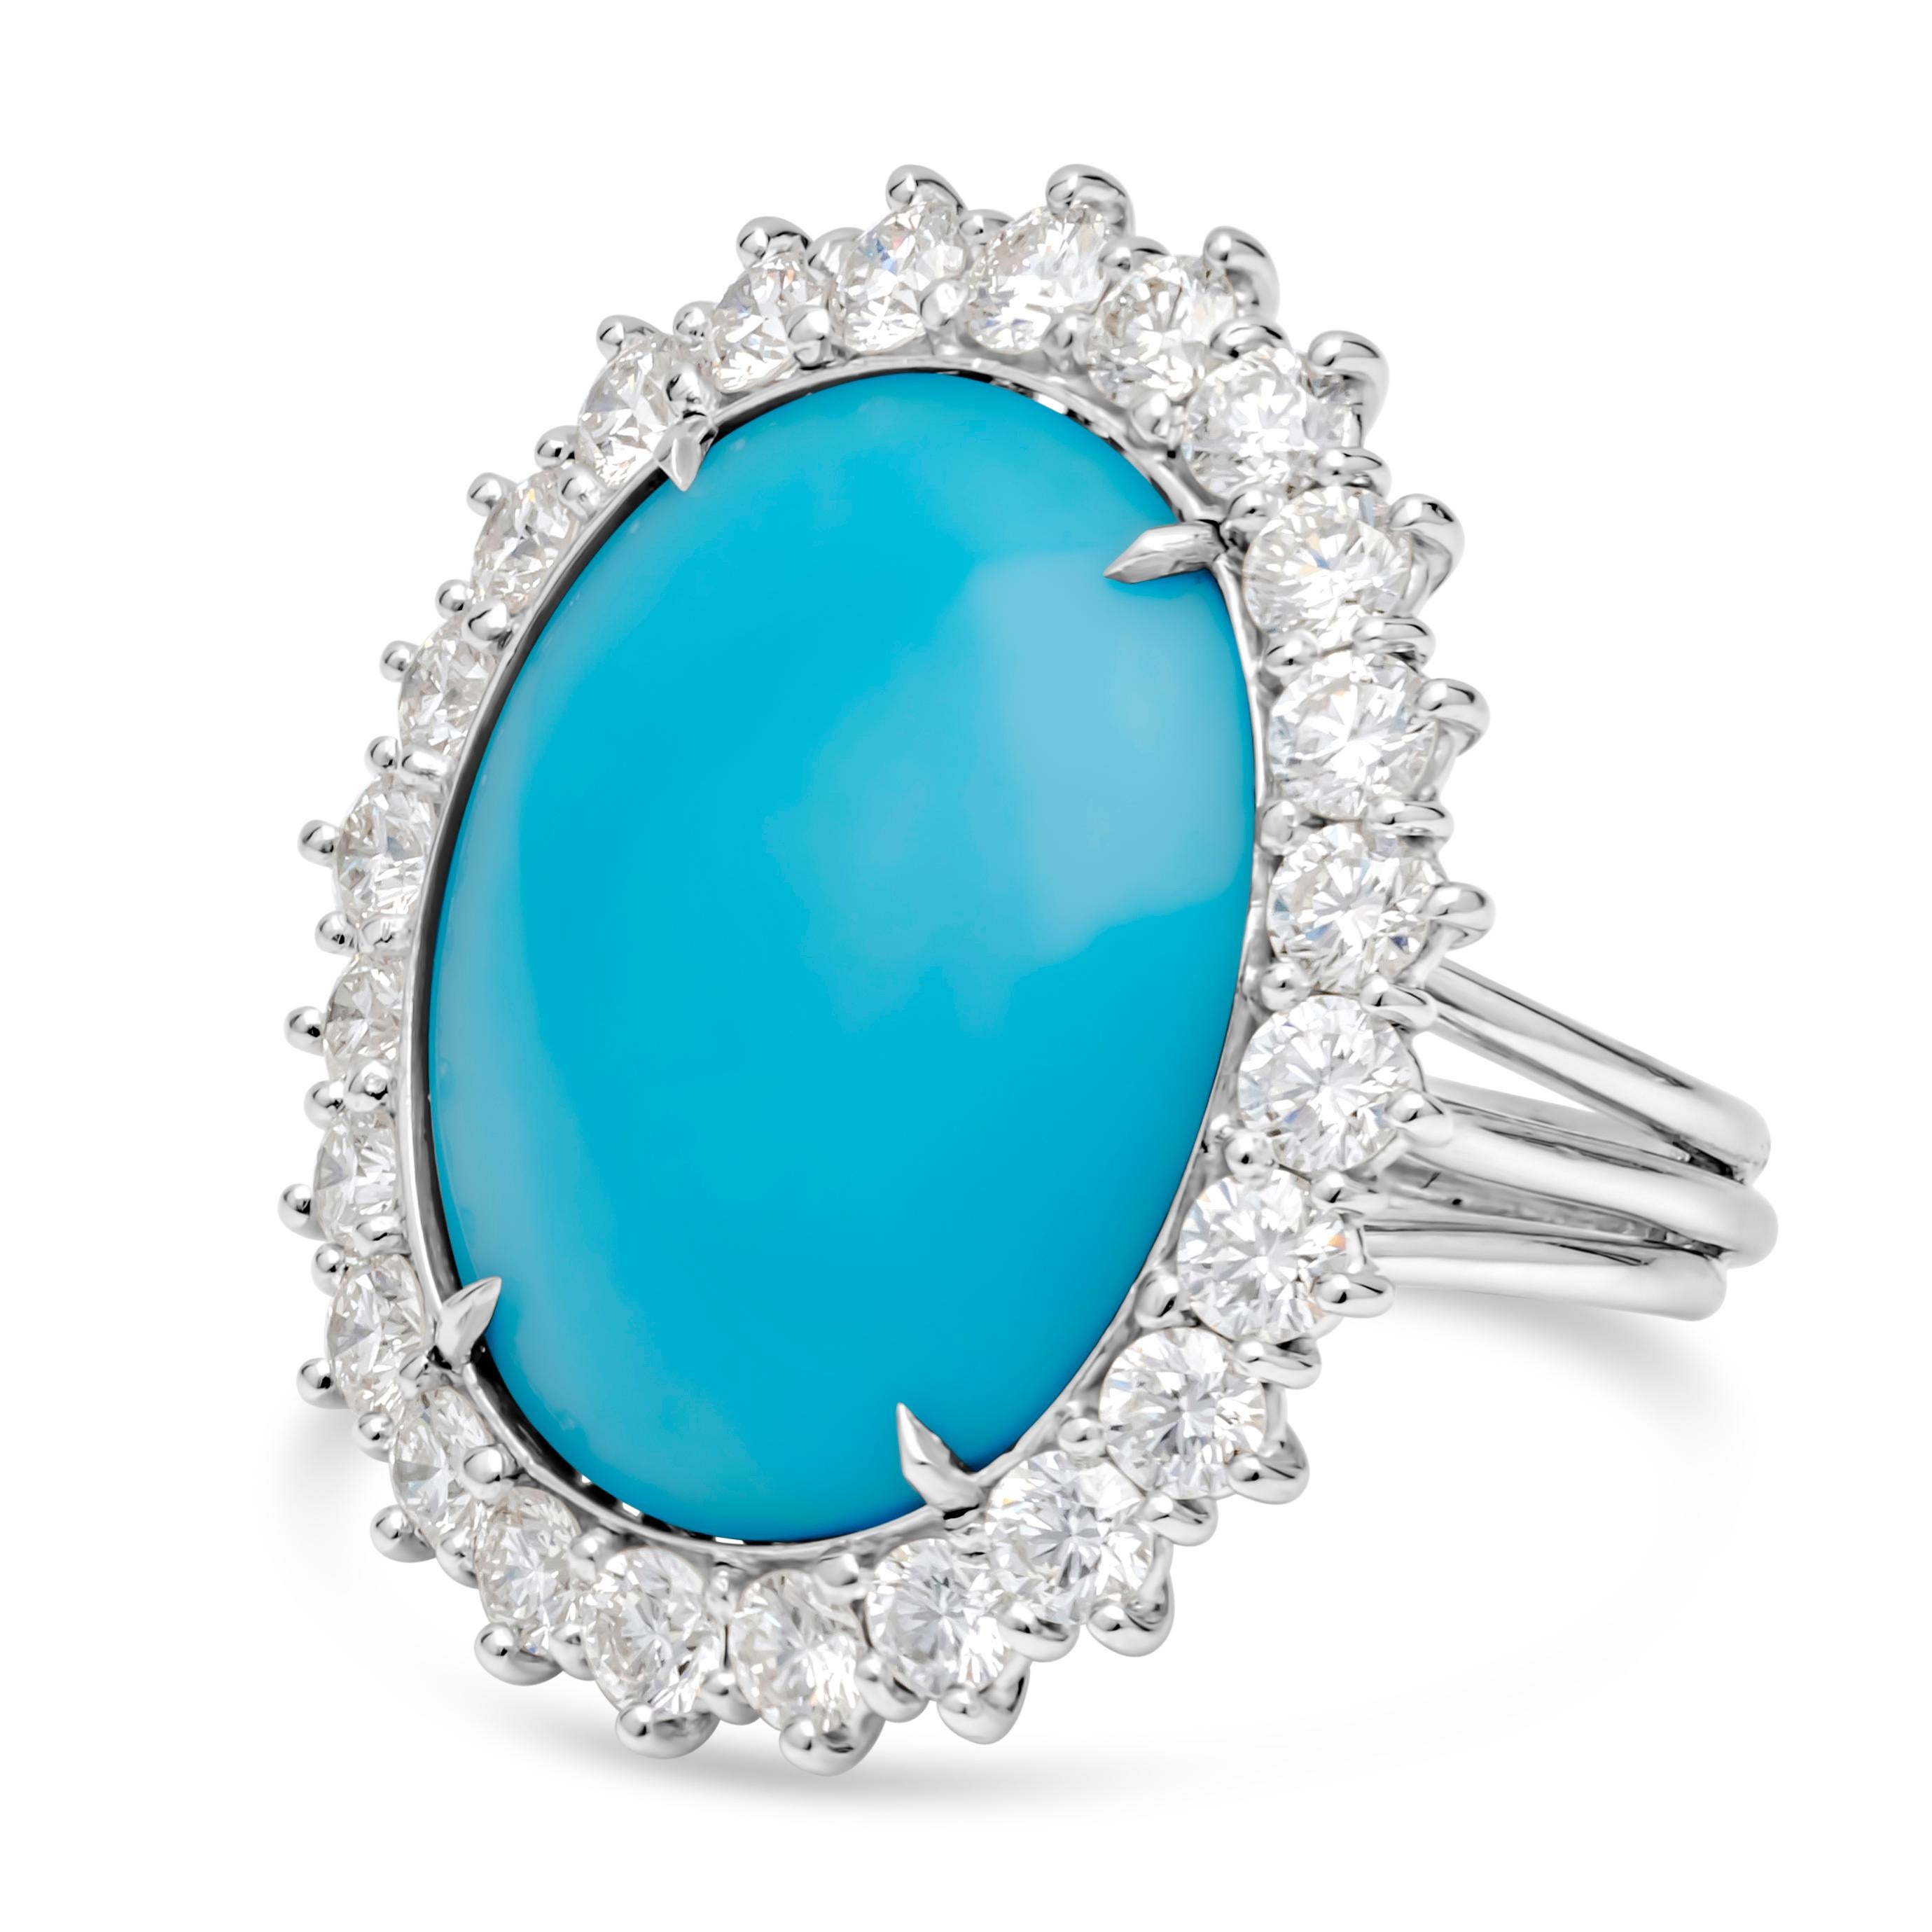 12.90 Carats Total Oval Cut Turquoise Gemstone & Round Diamond Fashion Ring In New Condition For Sale In New York, NY